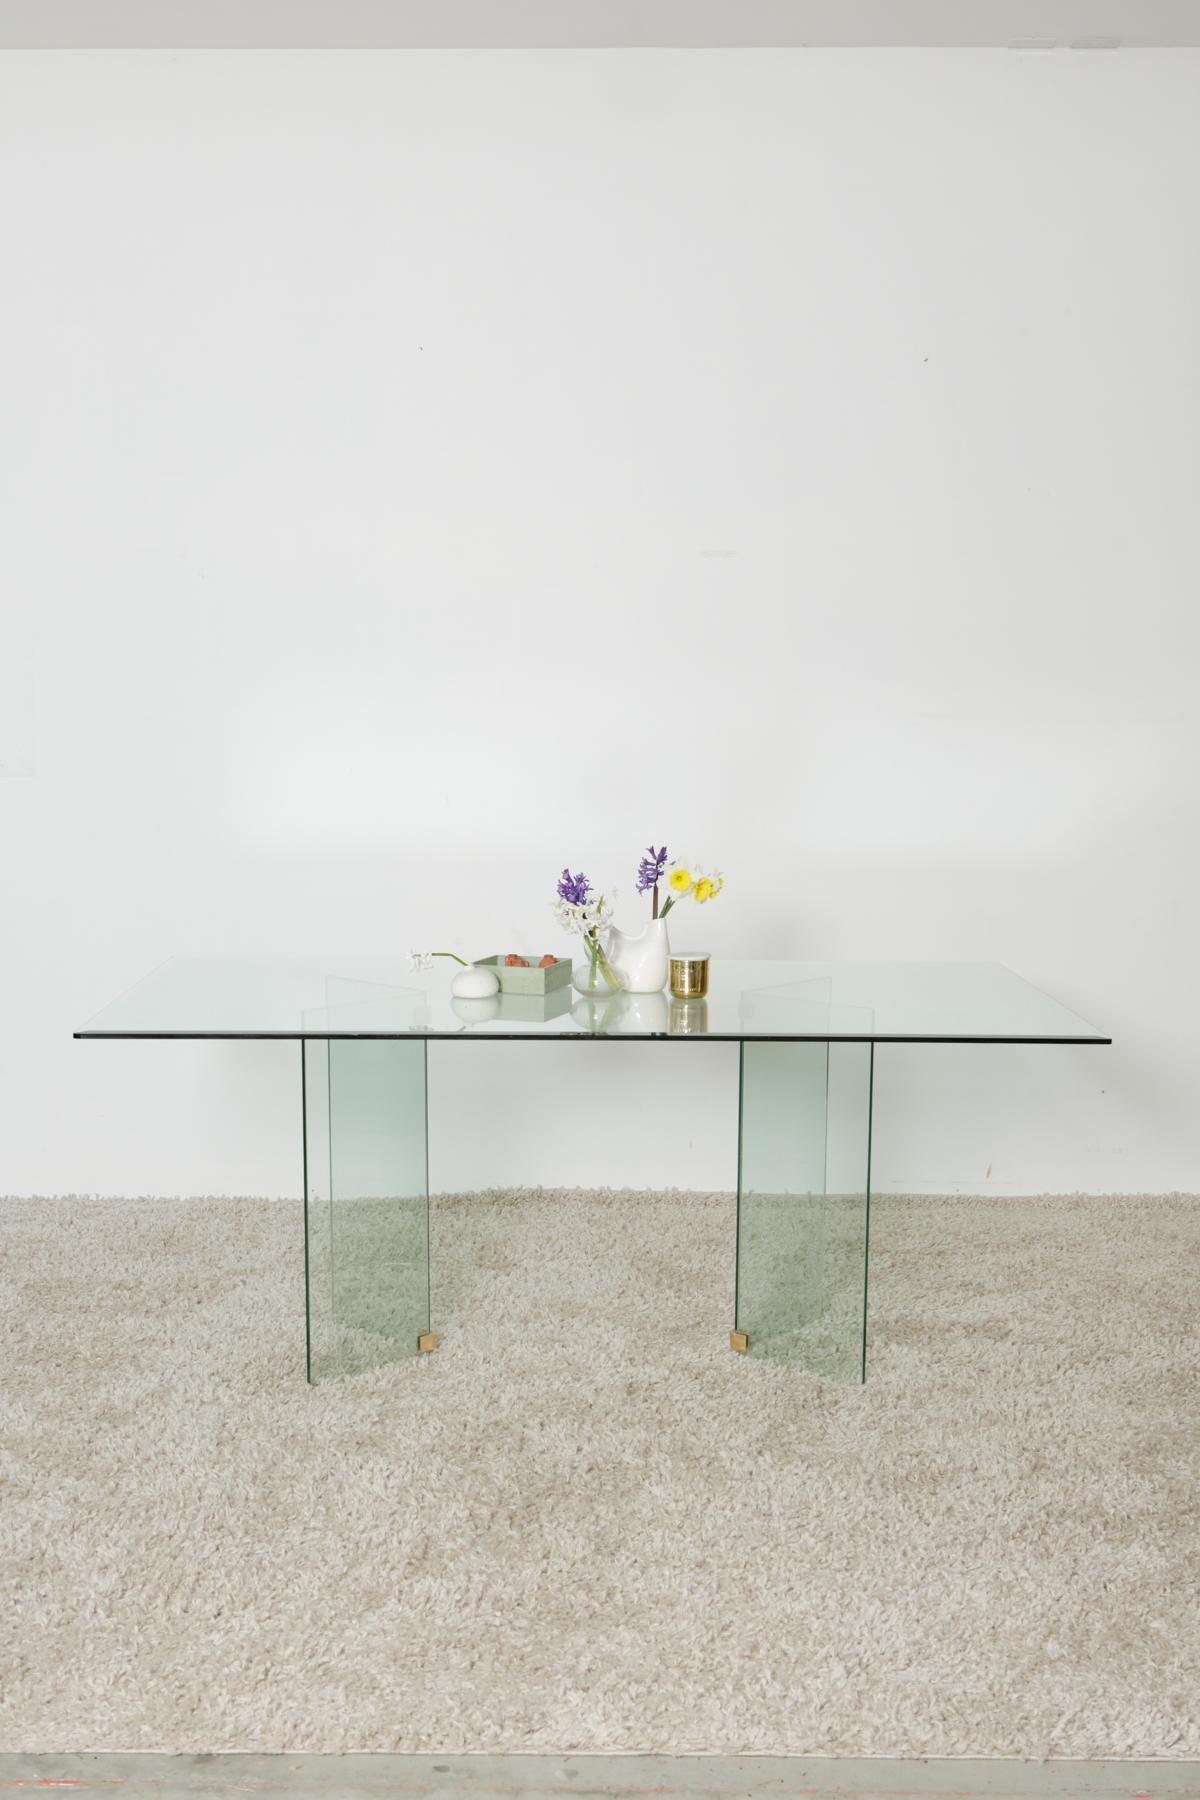 1980s glass dining table seats 6-8 people in style of Pace Collection

Beautiful all glass modern dining table in style of the Pace Collection with ½” beveled glass top and brass plated connectors on bases. Simple, sleek and elegant. The perfect